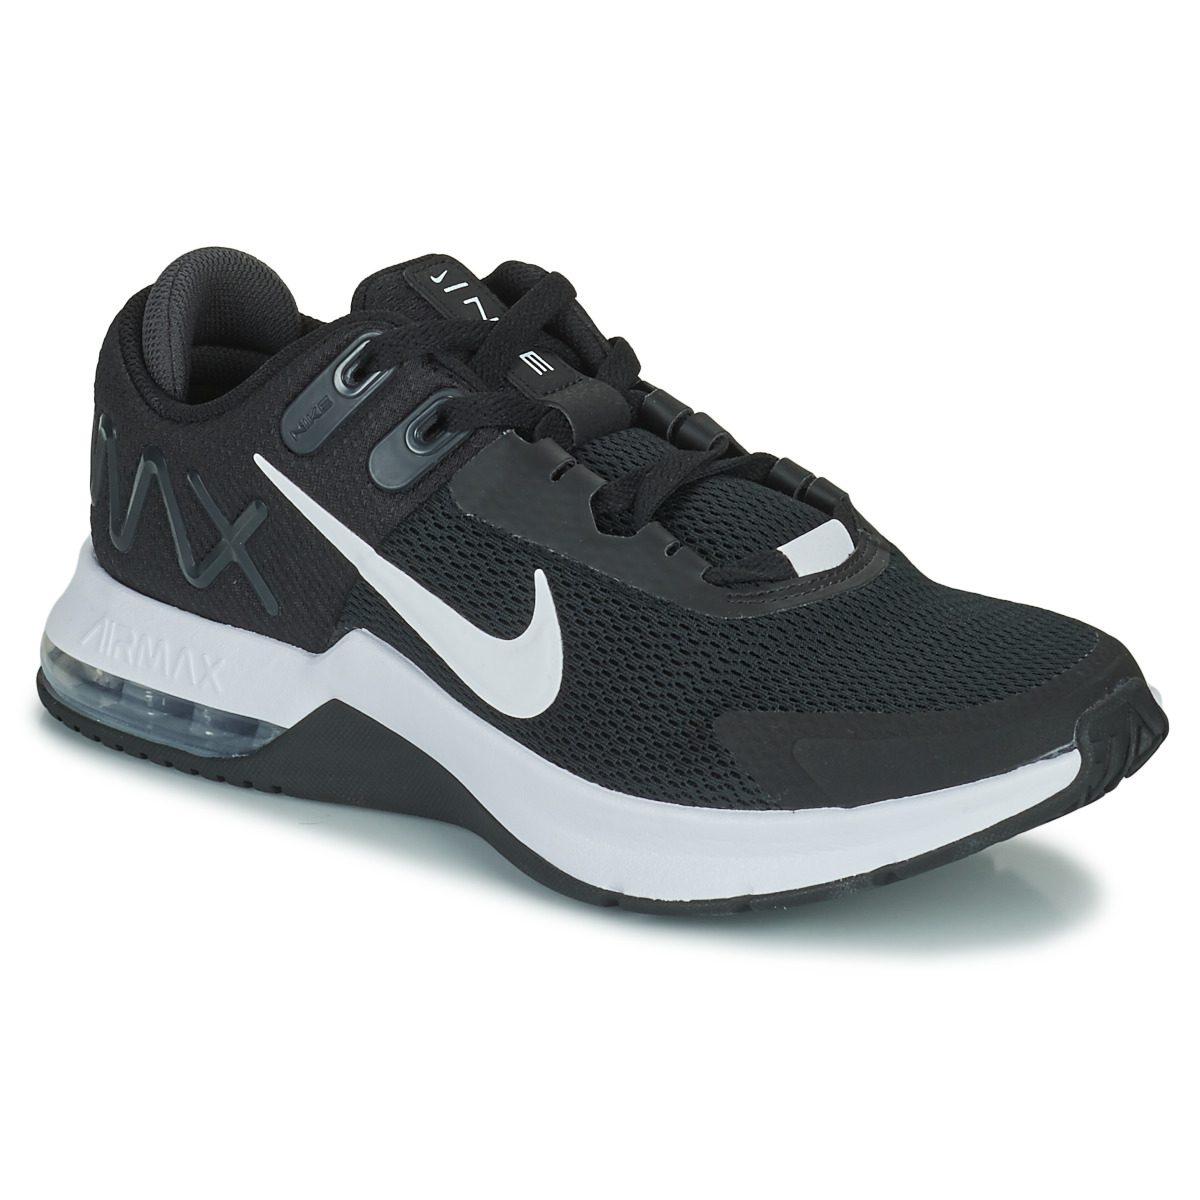 Nike AIR MAX ALPHA TRAINER 4 Black White - Free delivery | Spartoo NET - Shoes Multisport shoes USD/$86.00